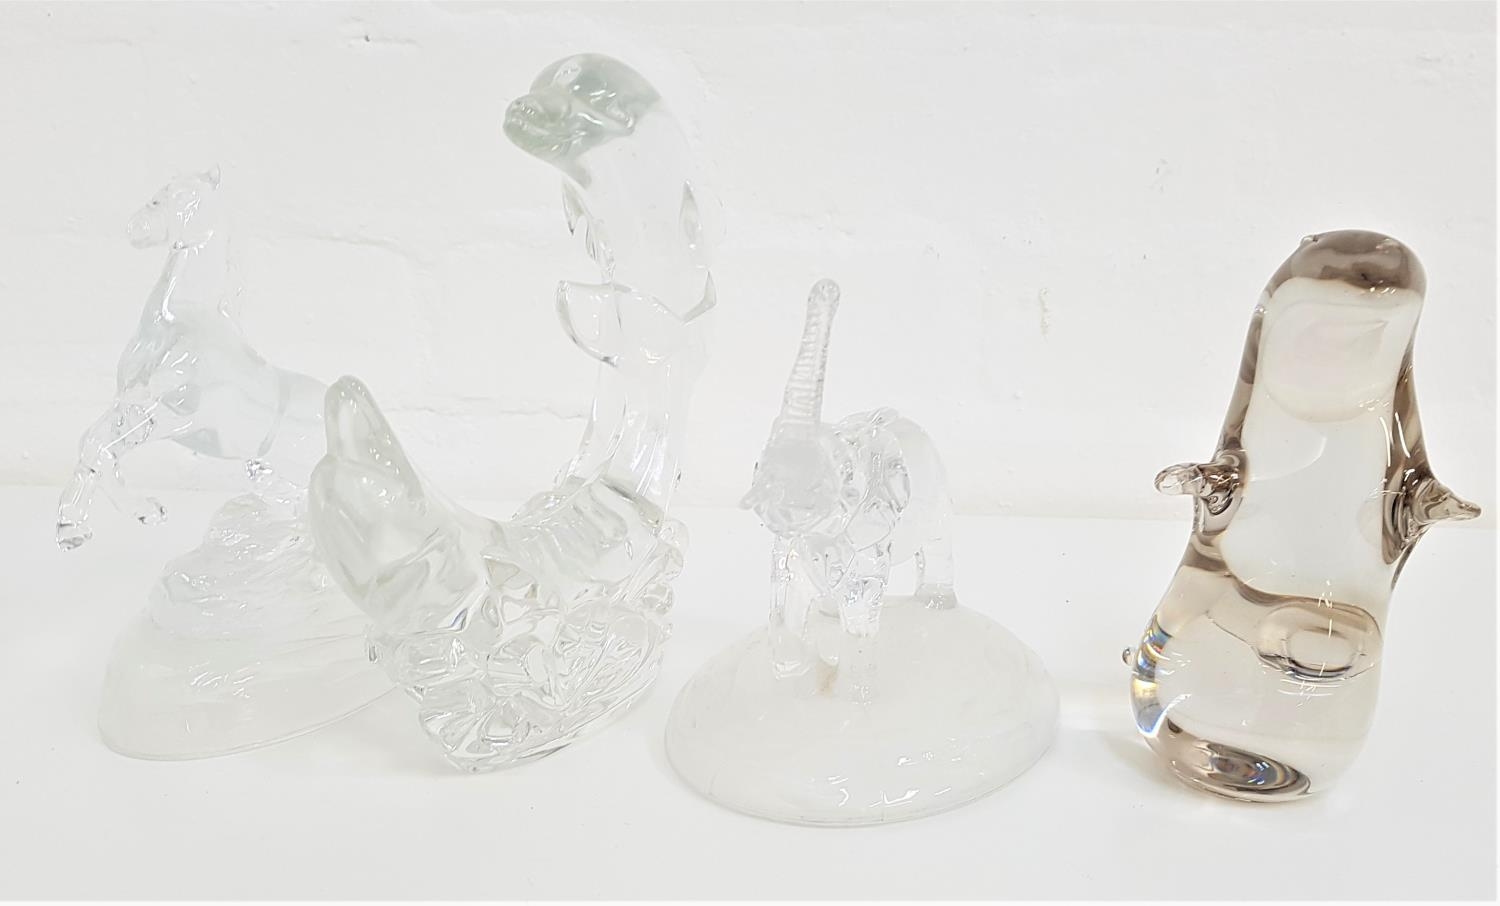 WATERFORD CRYSTAL DOLPHIN GROUP jumping through the waves, 19cm high, a glass elephant, 15cm high, a